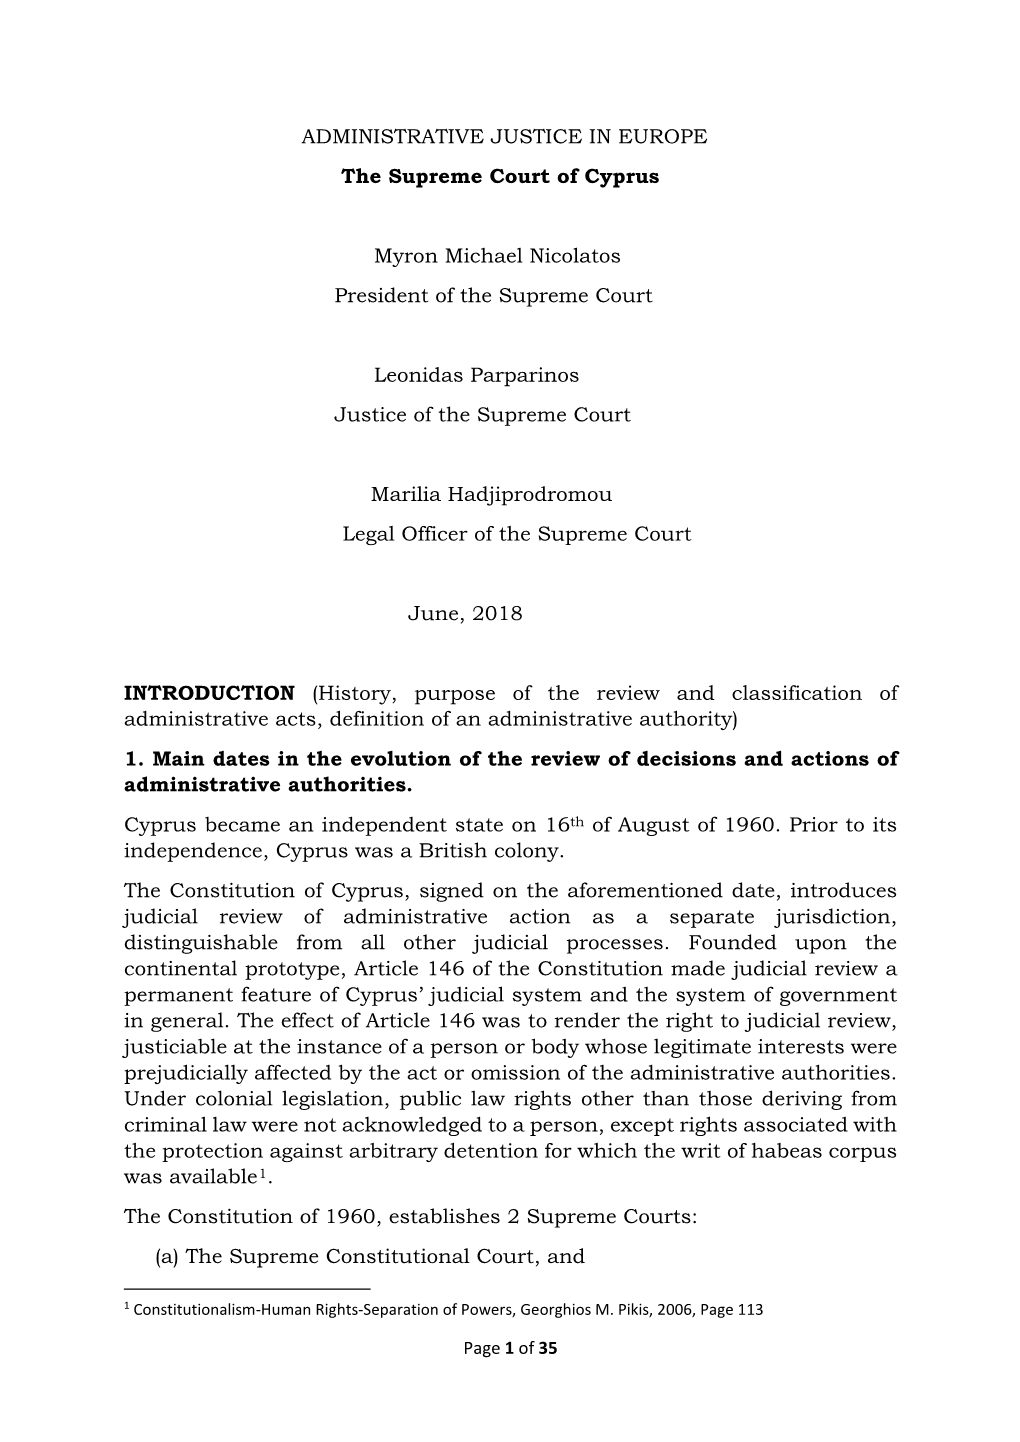 ADMINISTRATIVE JUSTICE in EUROPE the Supreme Court of Cyprus